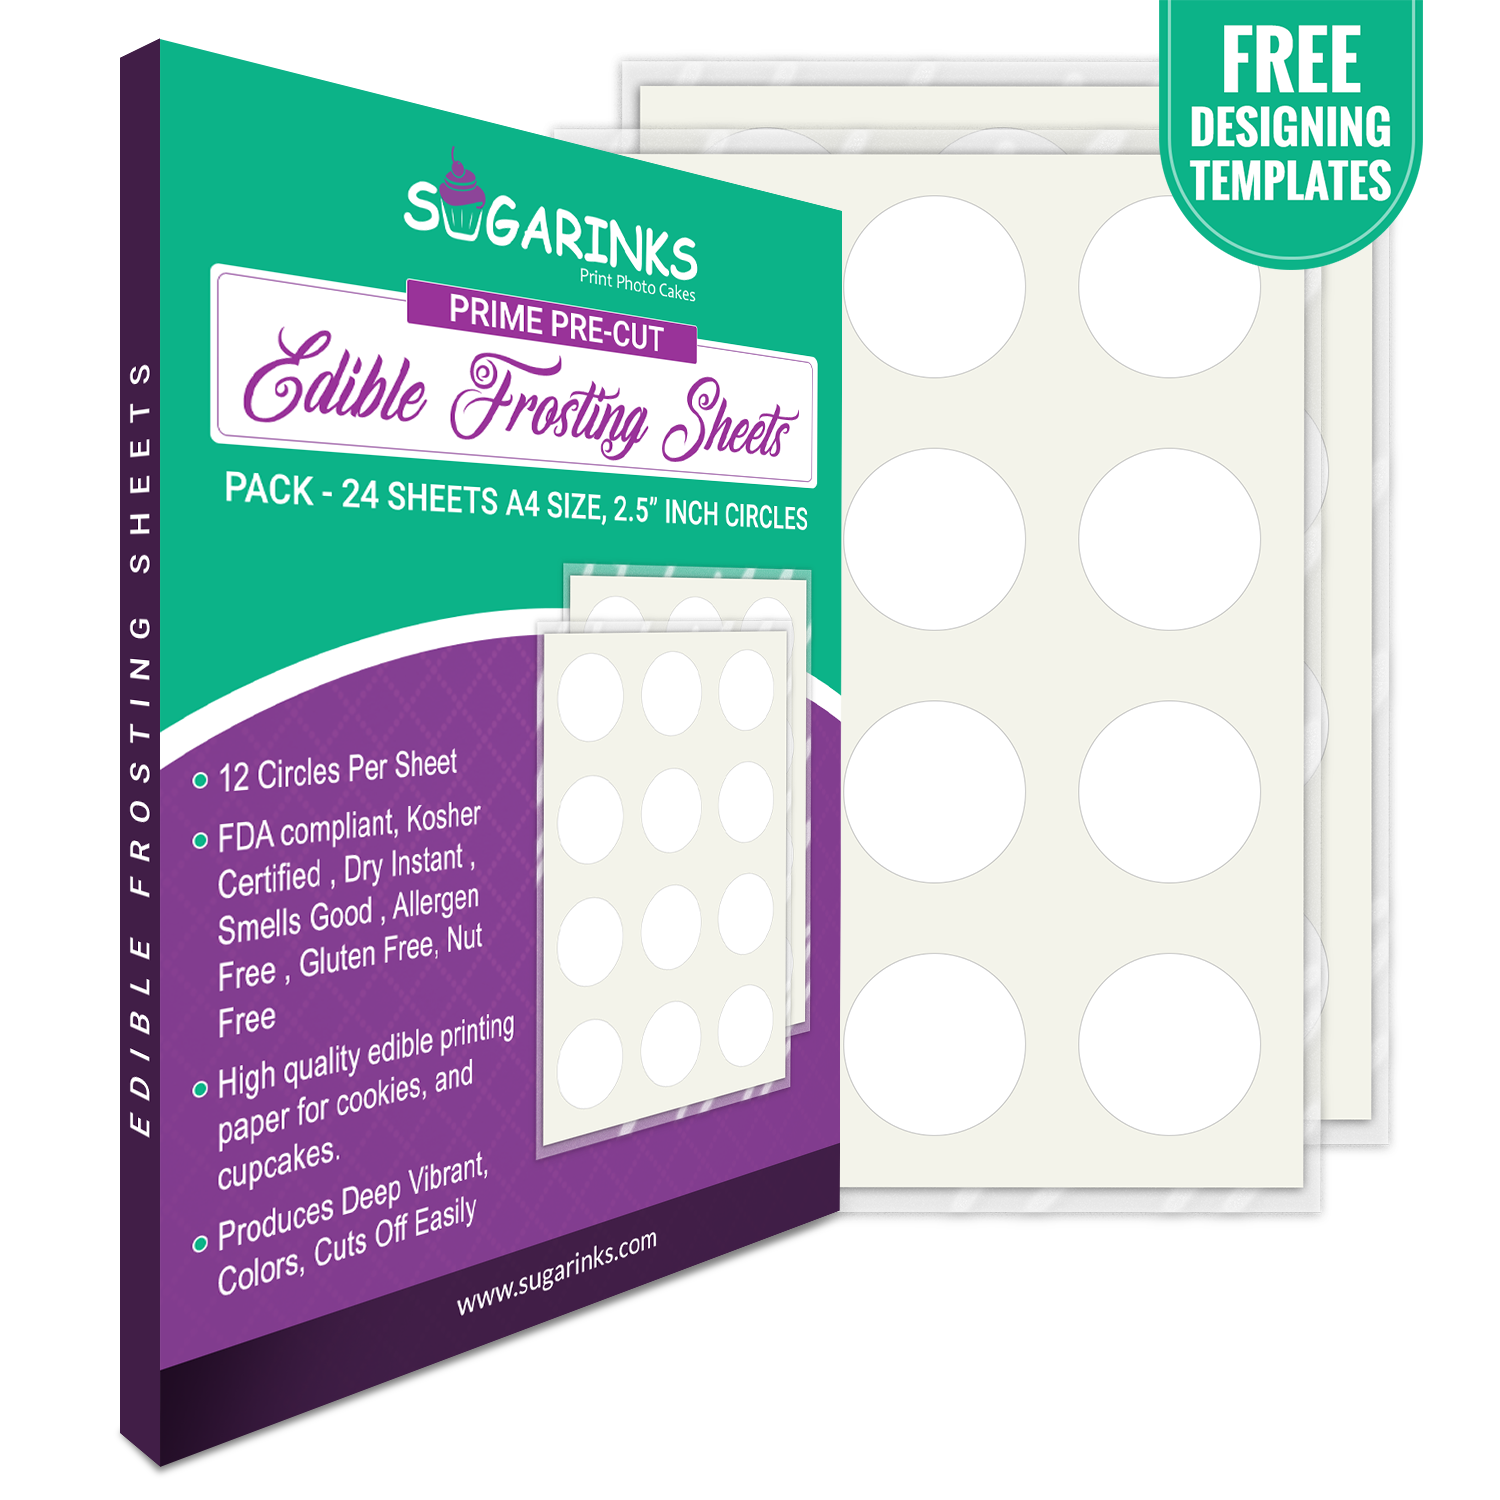 Sugarinks Premium Quality Pre-Cut Circles Frosting Sheets (2.5 inches, 12 Circles) - A4 Size, Pack of 24